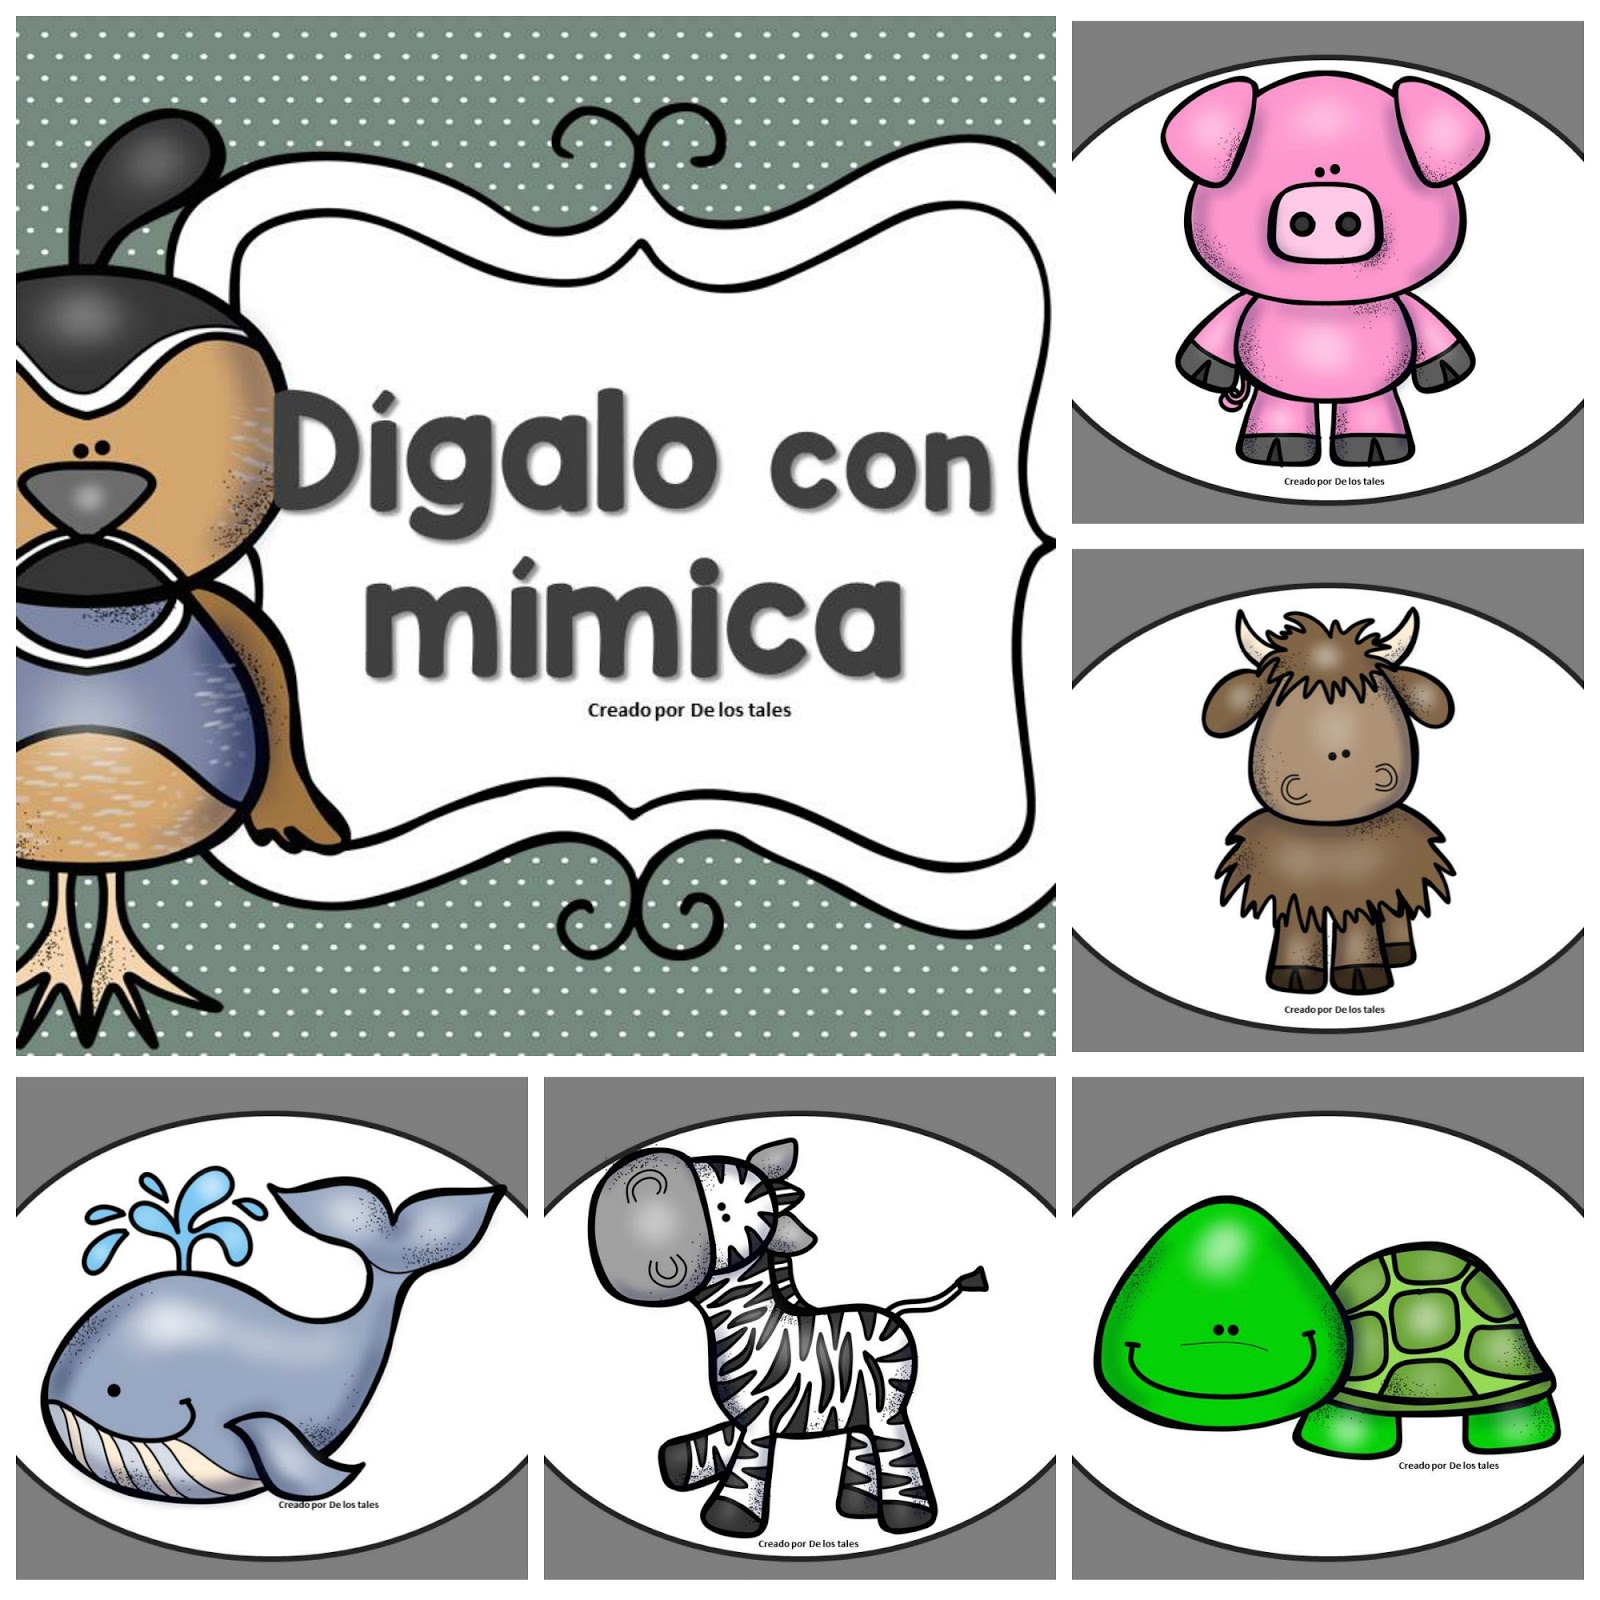 21++ Digalo con mimica frases info